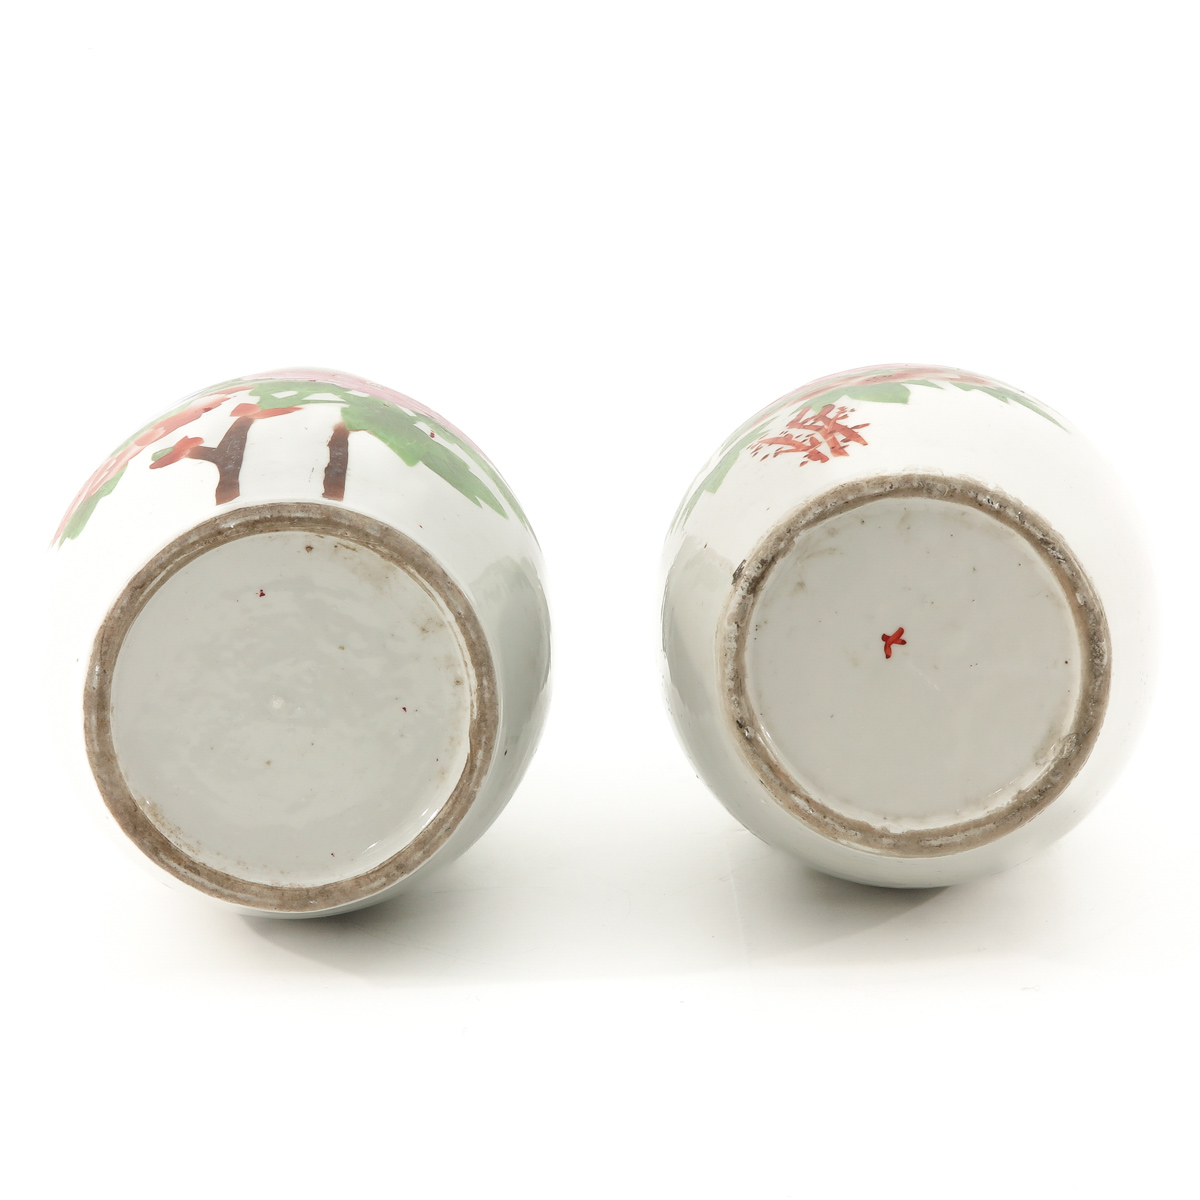 A Pair of Polychrome Decor Vases - Image 6 of 10